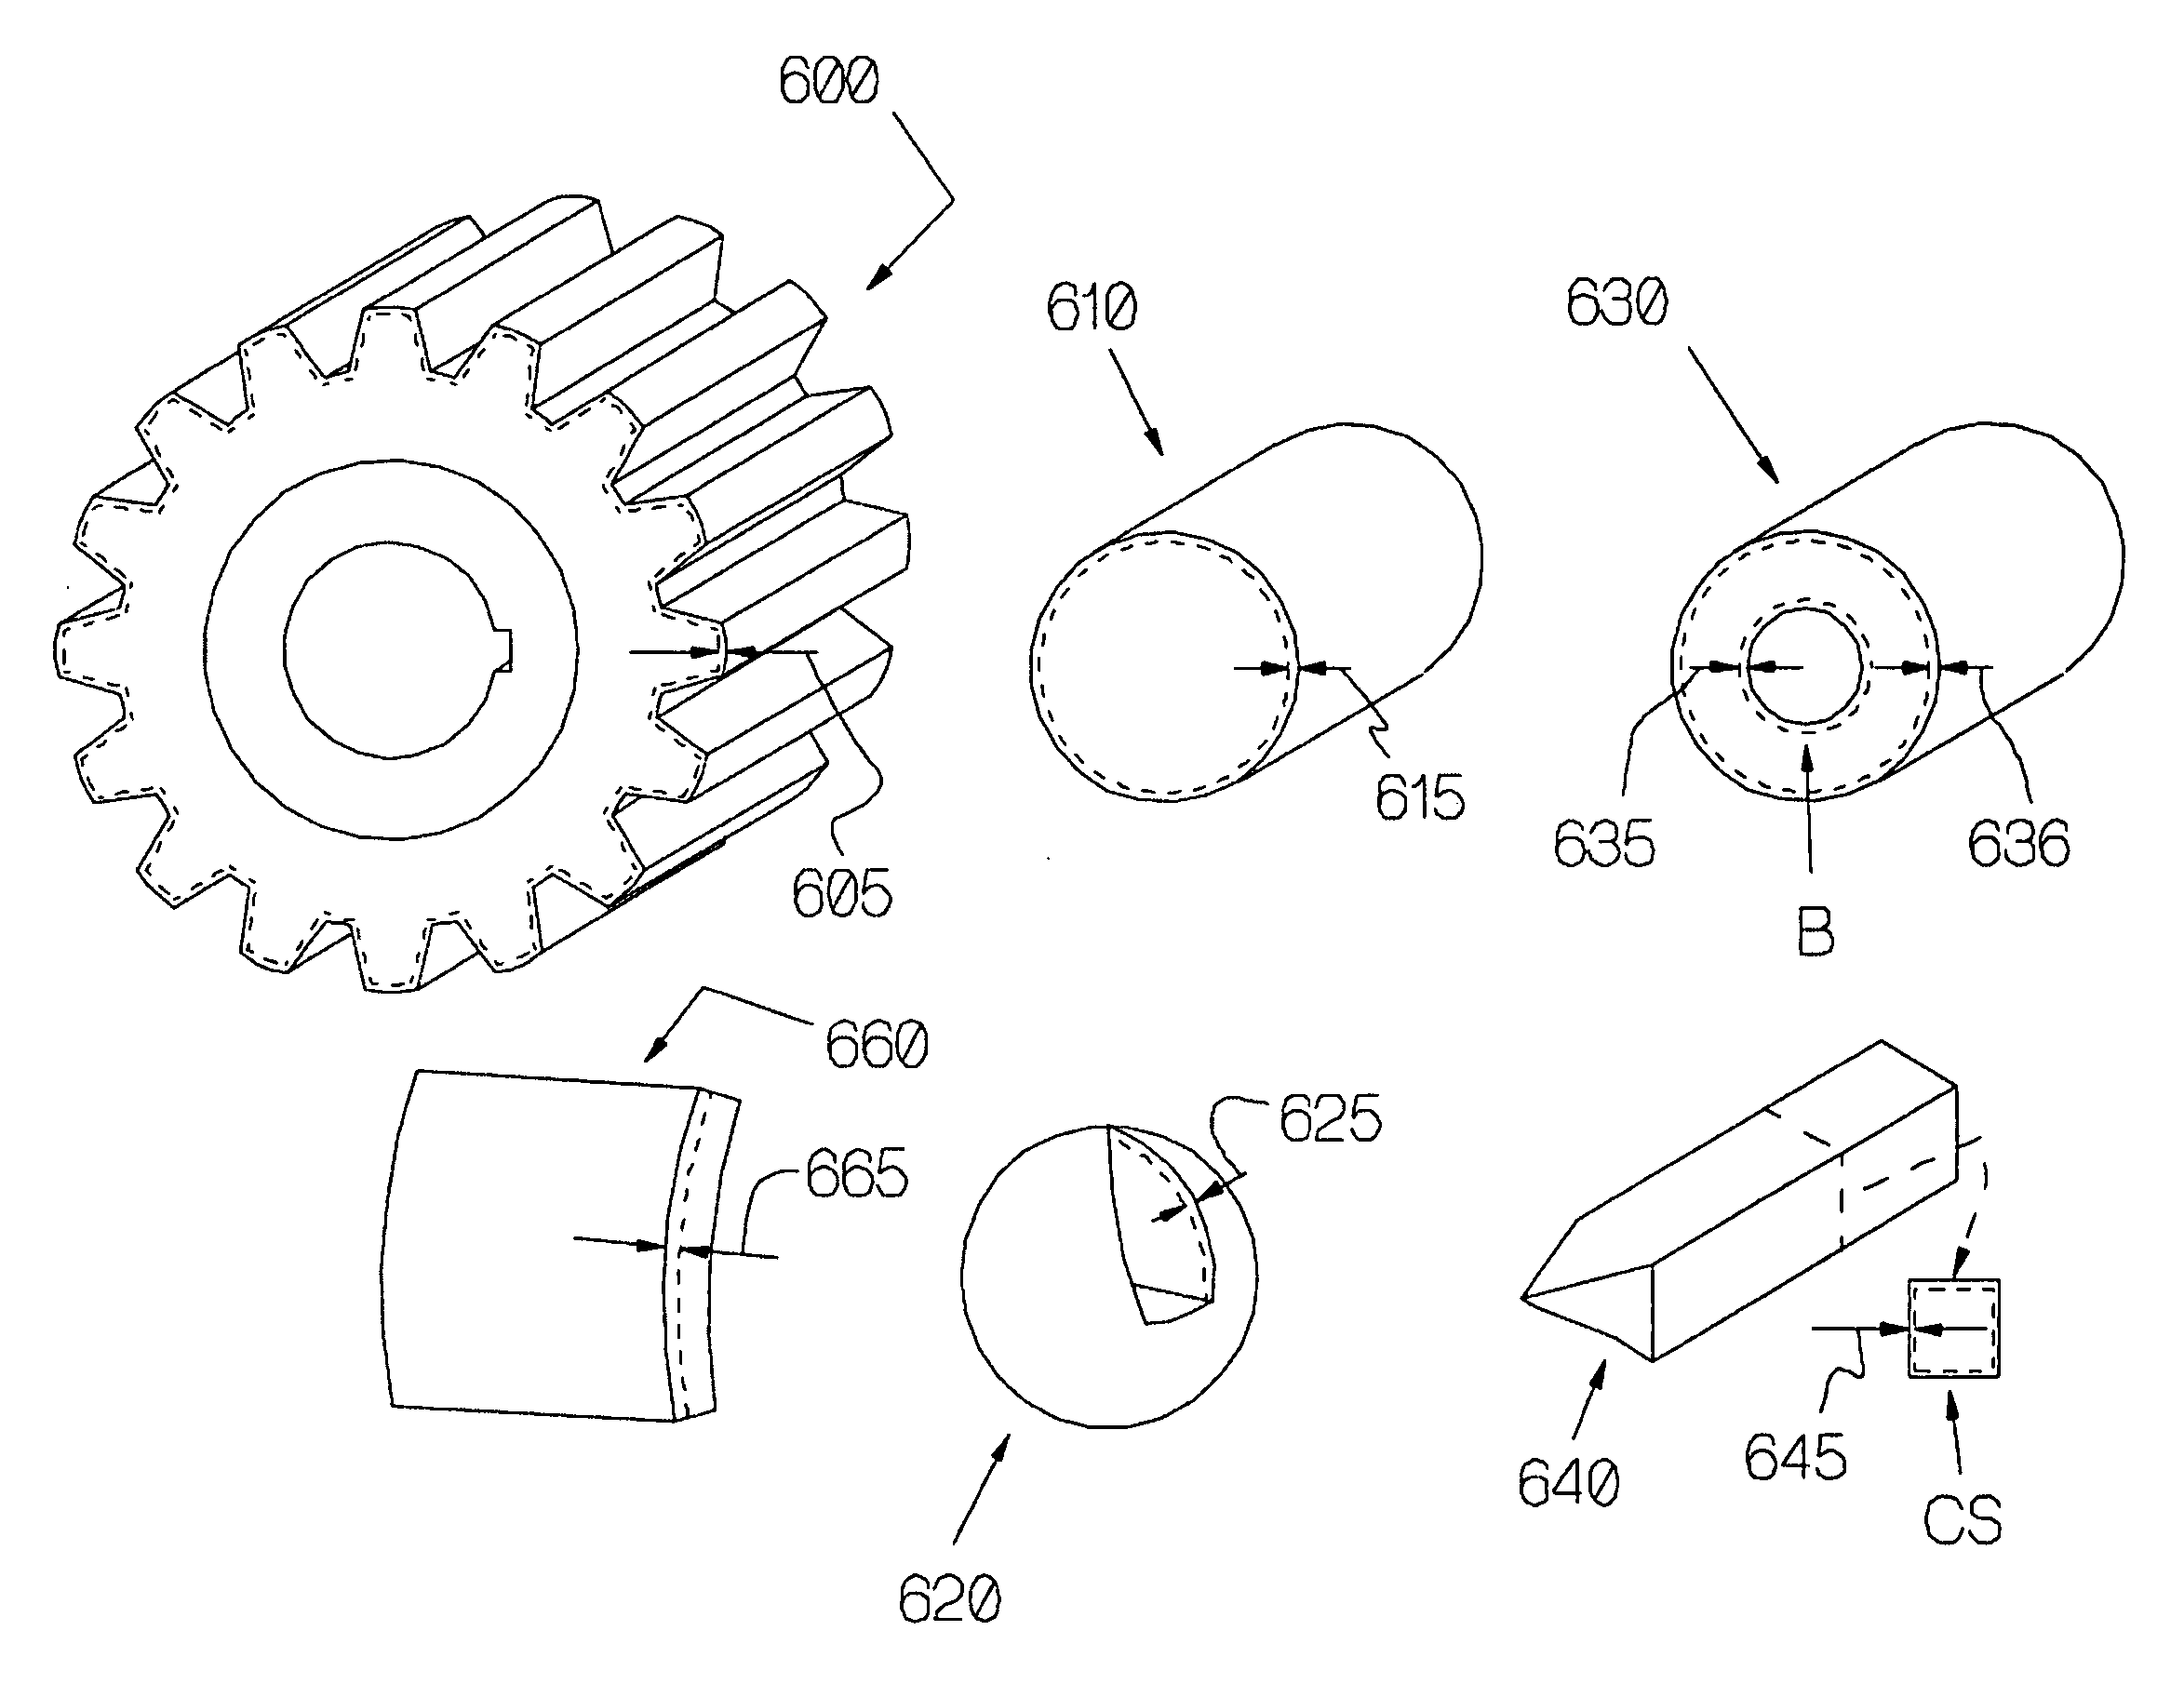 System and method for surface hardening of refractory metals